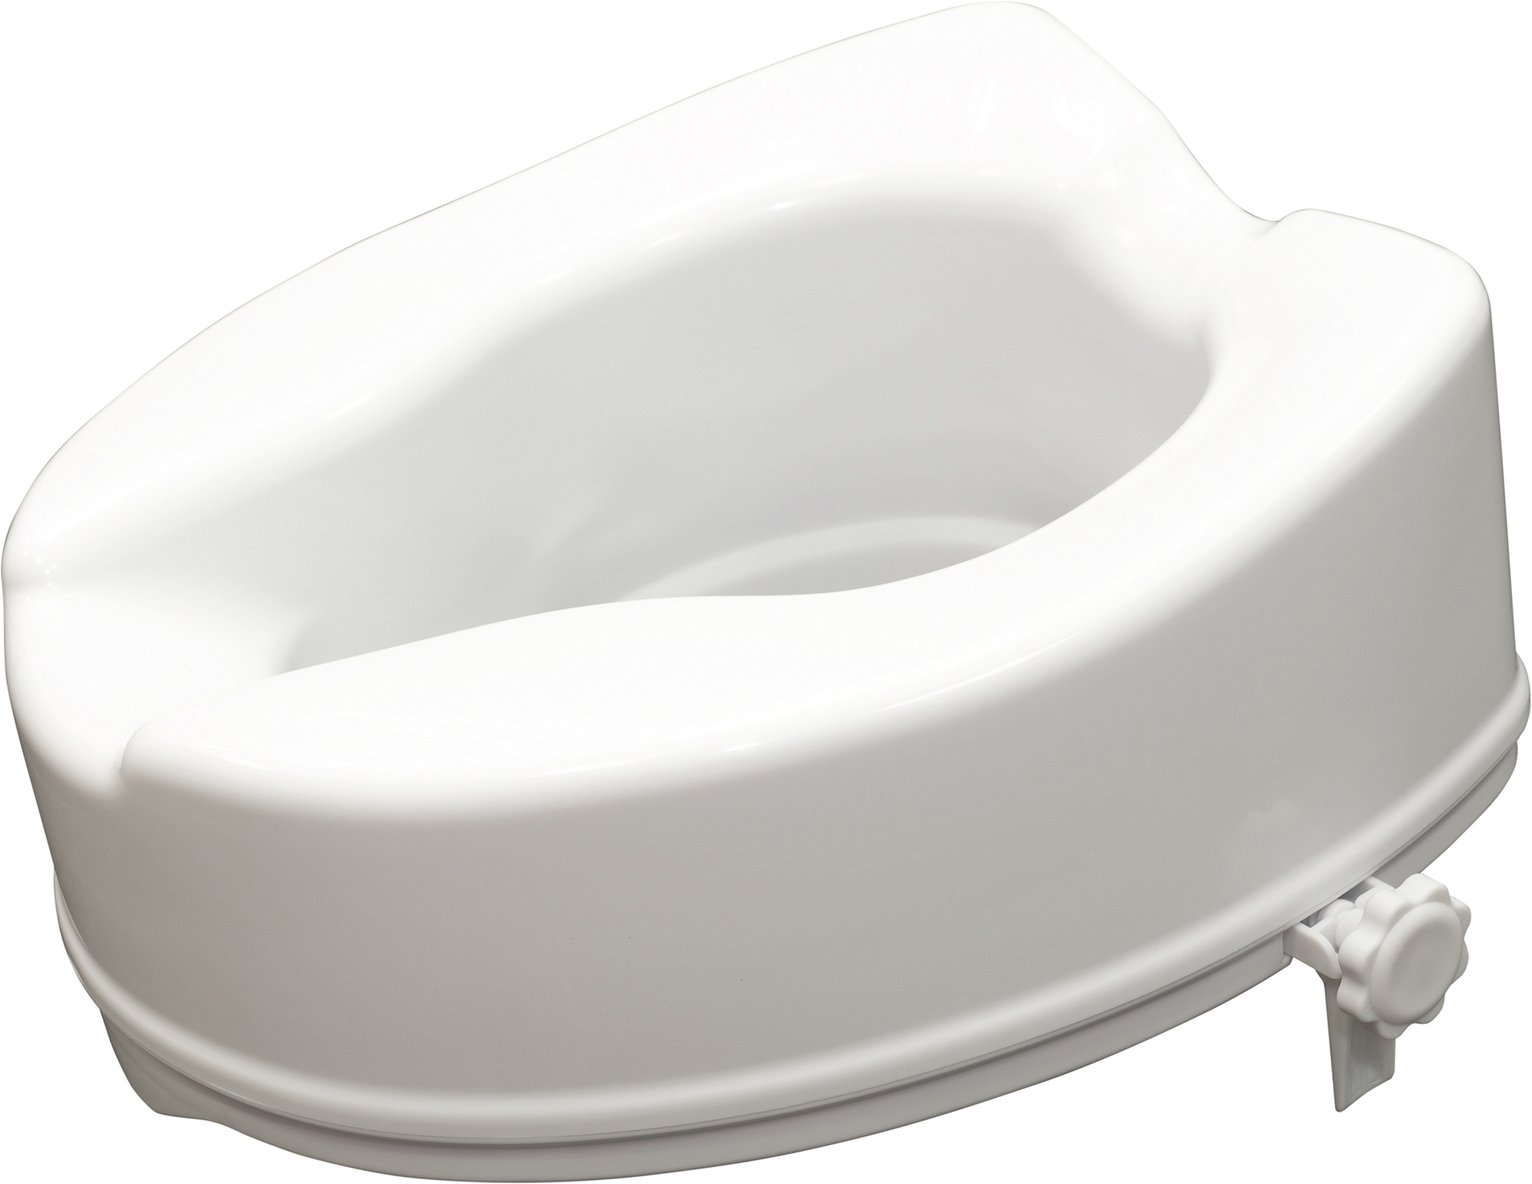 Aidapt 6 Inches Raised Toilet Seat with No Lid